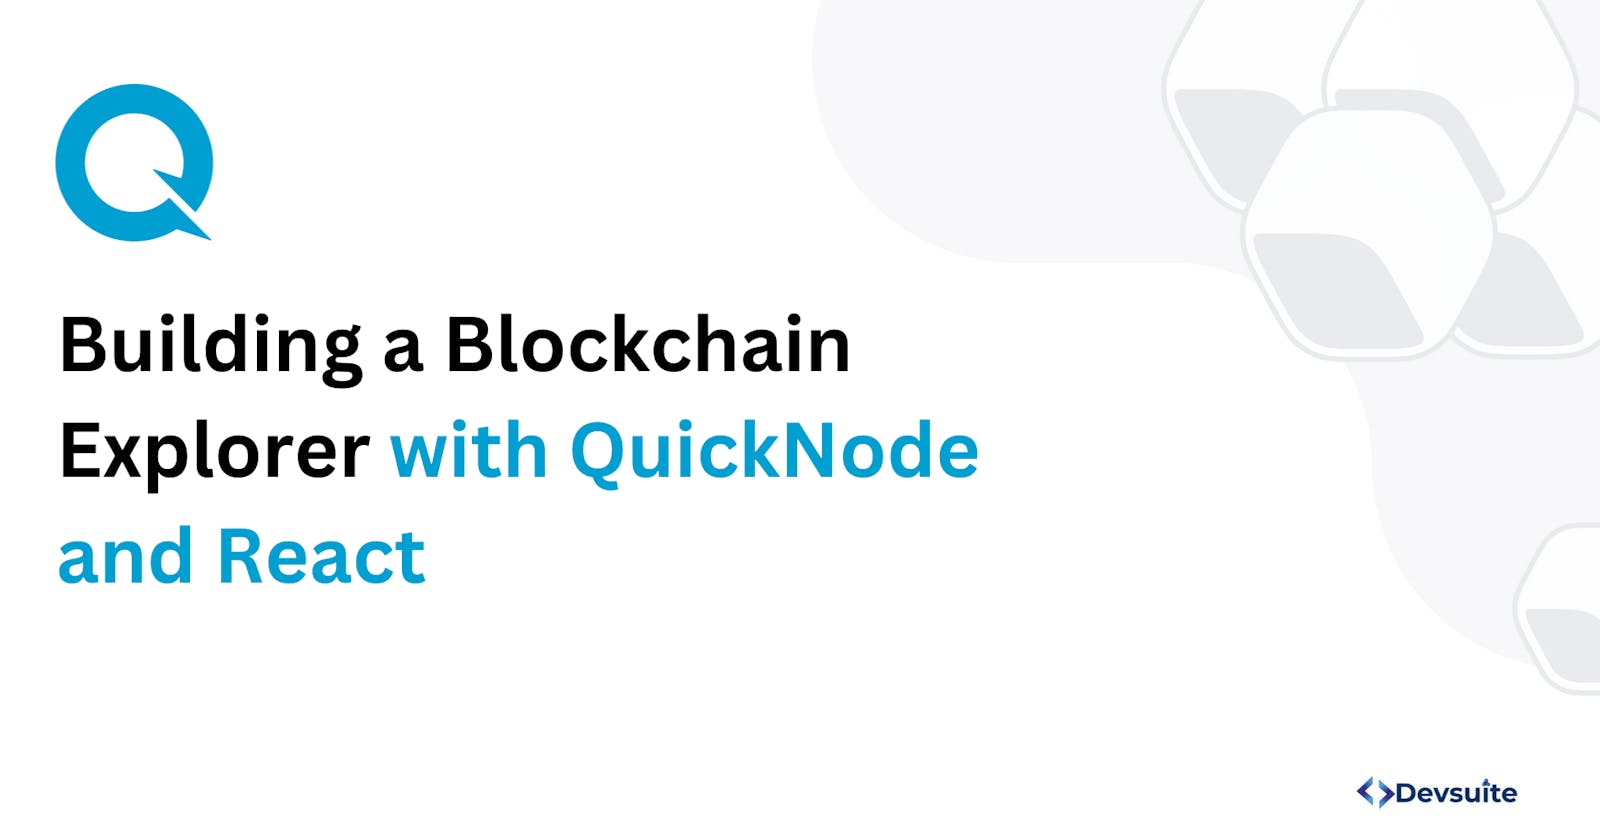 Building a Blockchain Explorer with QuickNode and React